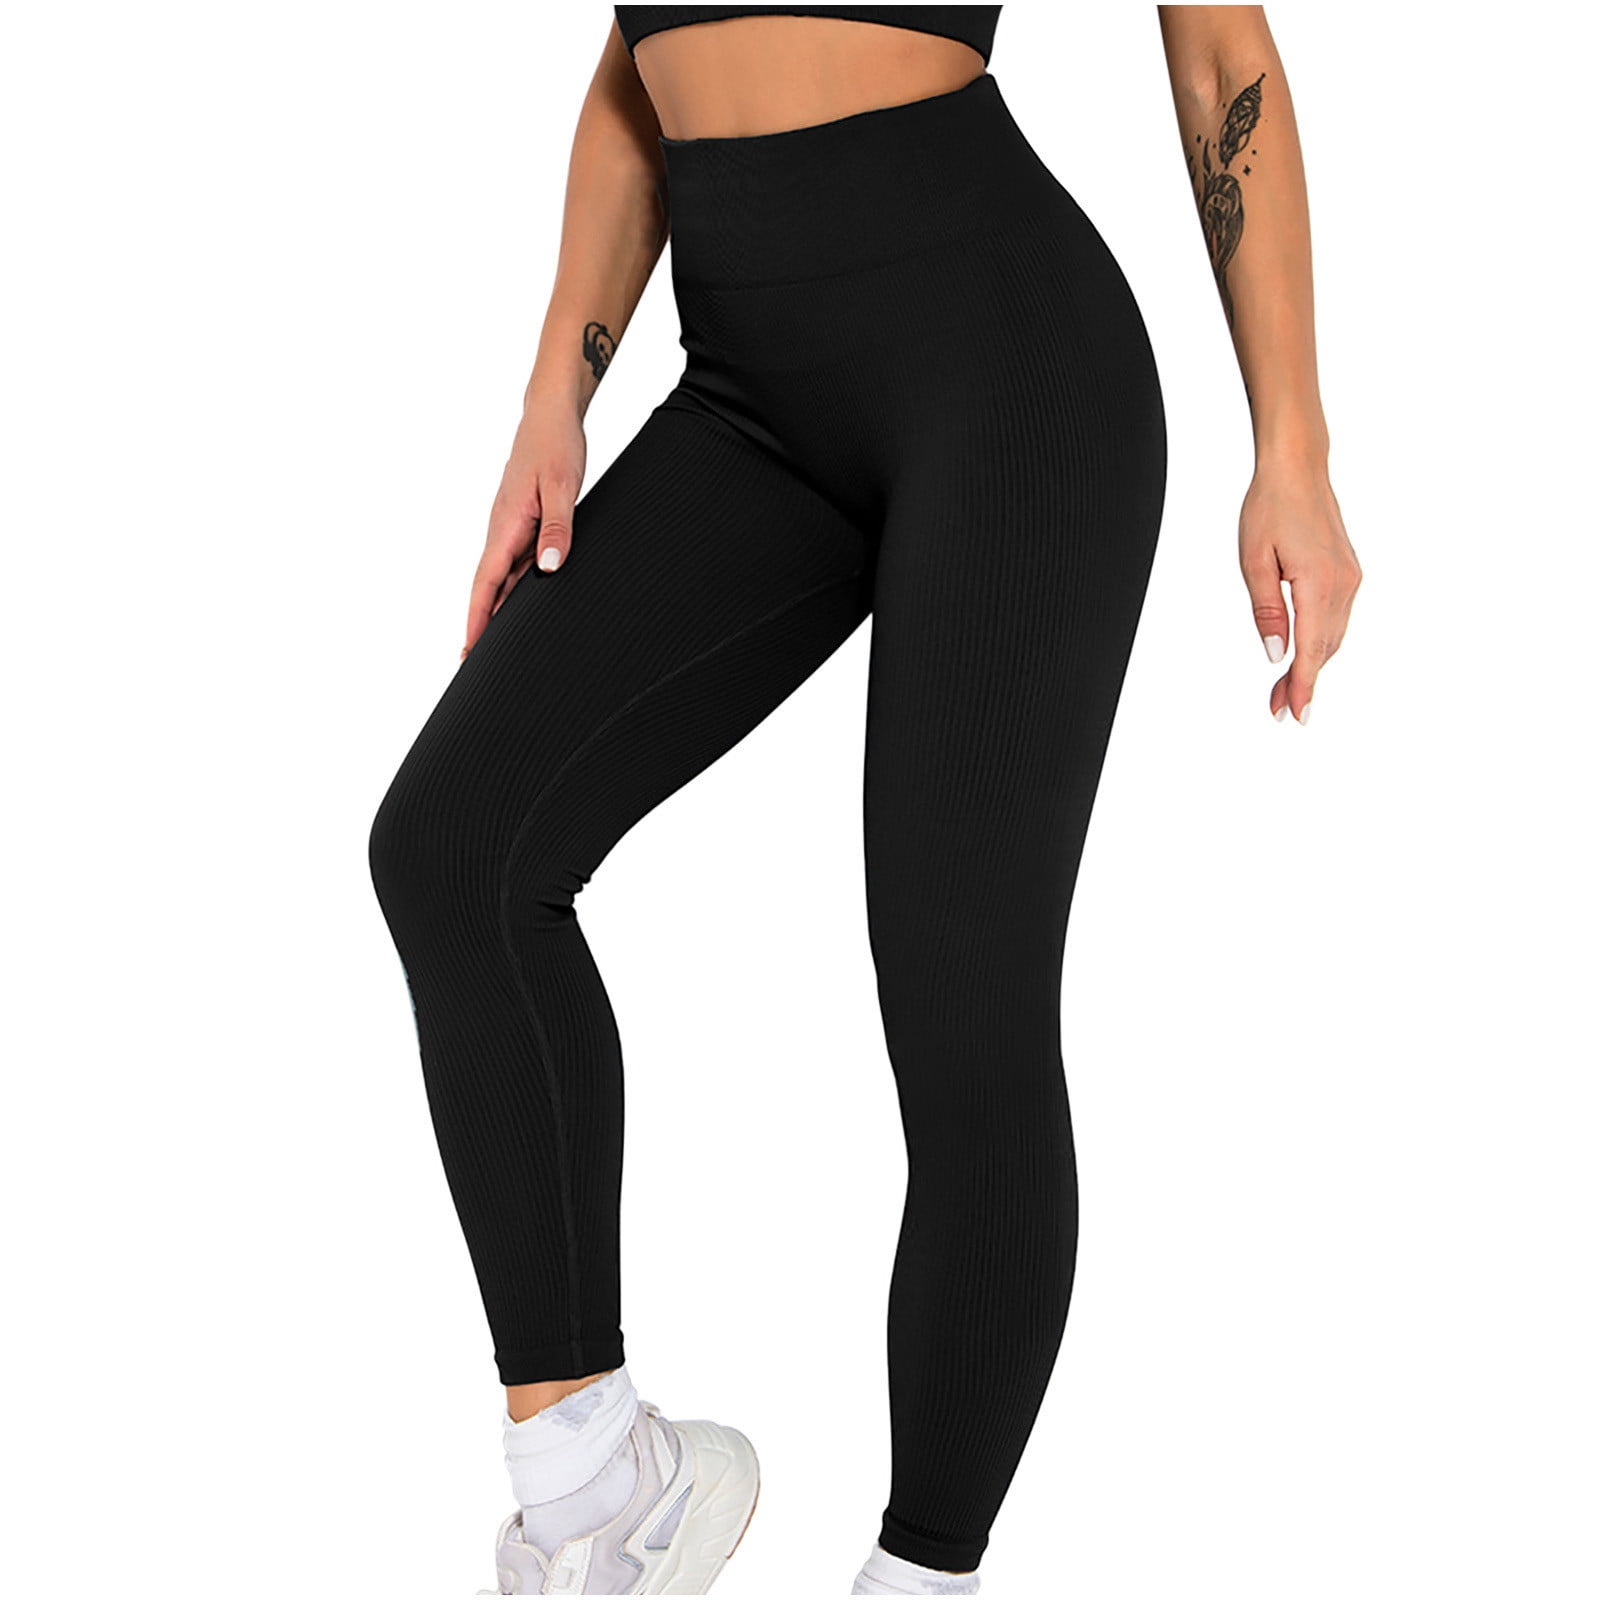 SELONE Jeggings for Women Workout Gym Running Sports Yogalicious Utility  Dressy Everyday Soft Lifting Leggings Capris Leggings for Women Capri